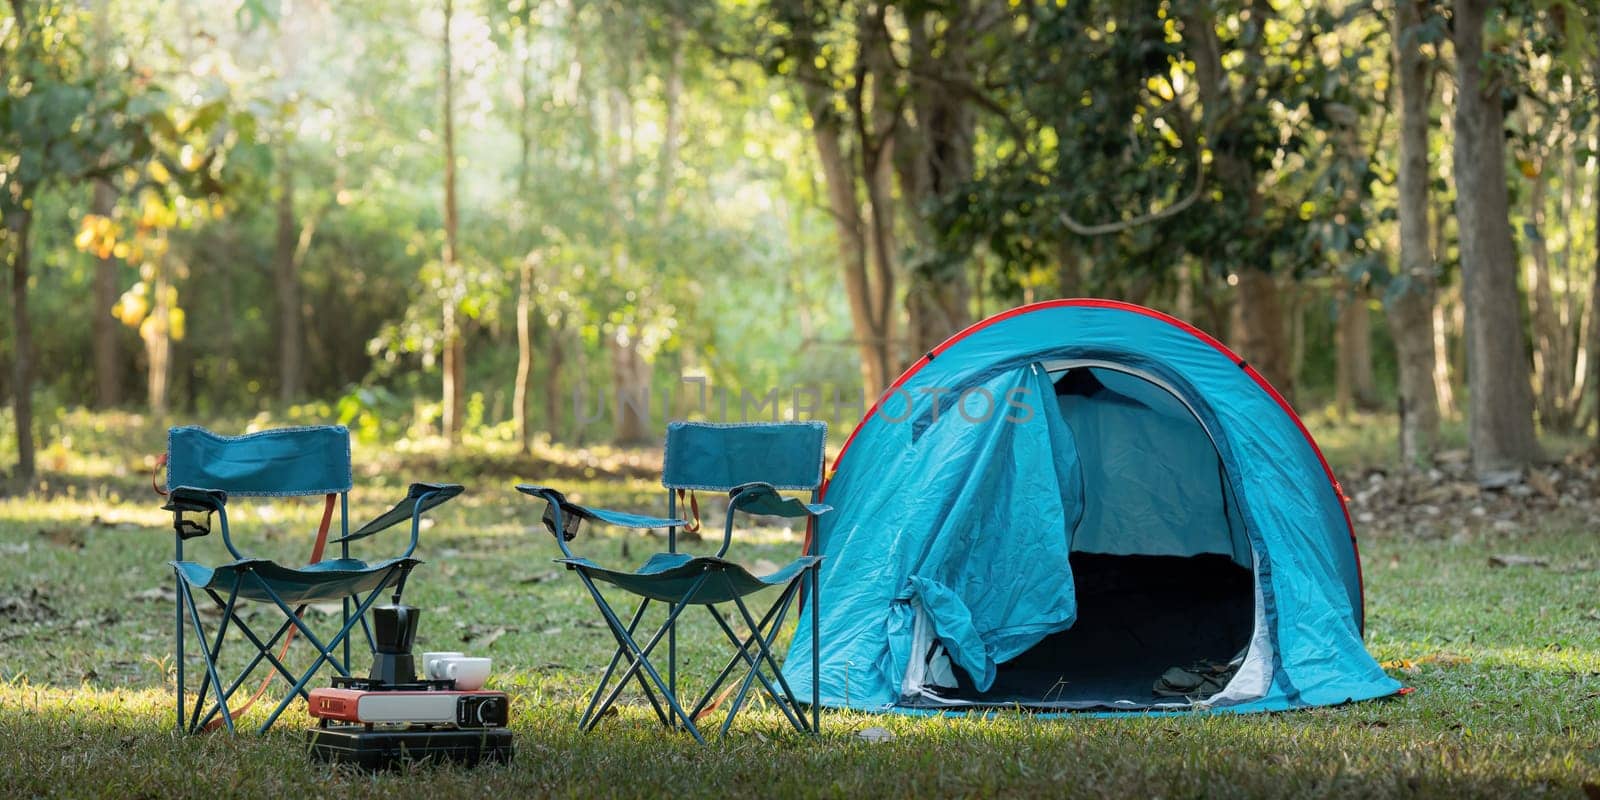 Outdoor activity concept camping are with tent and equipment for camping.